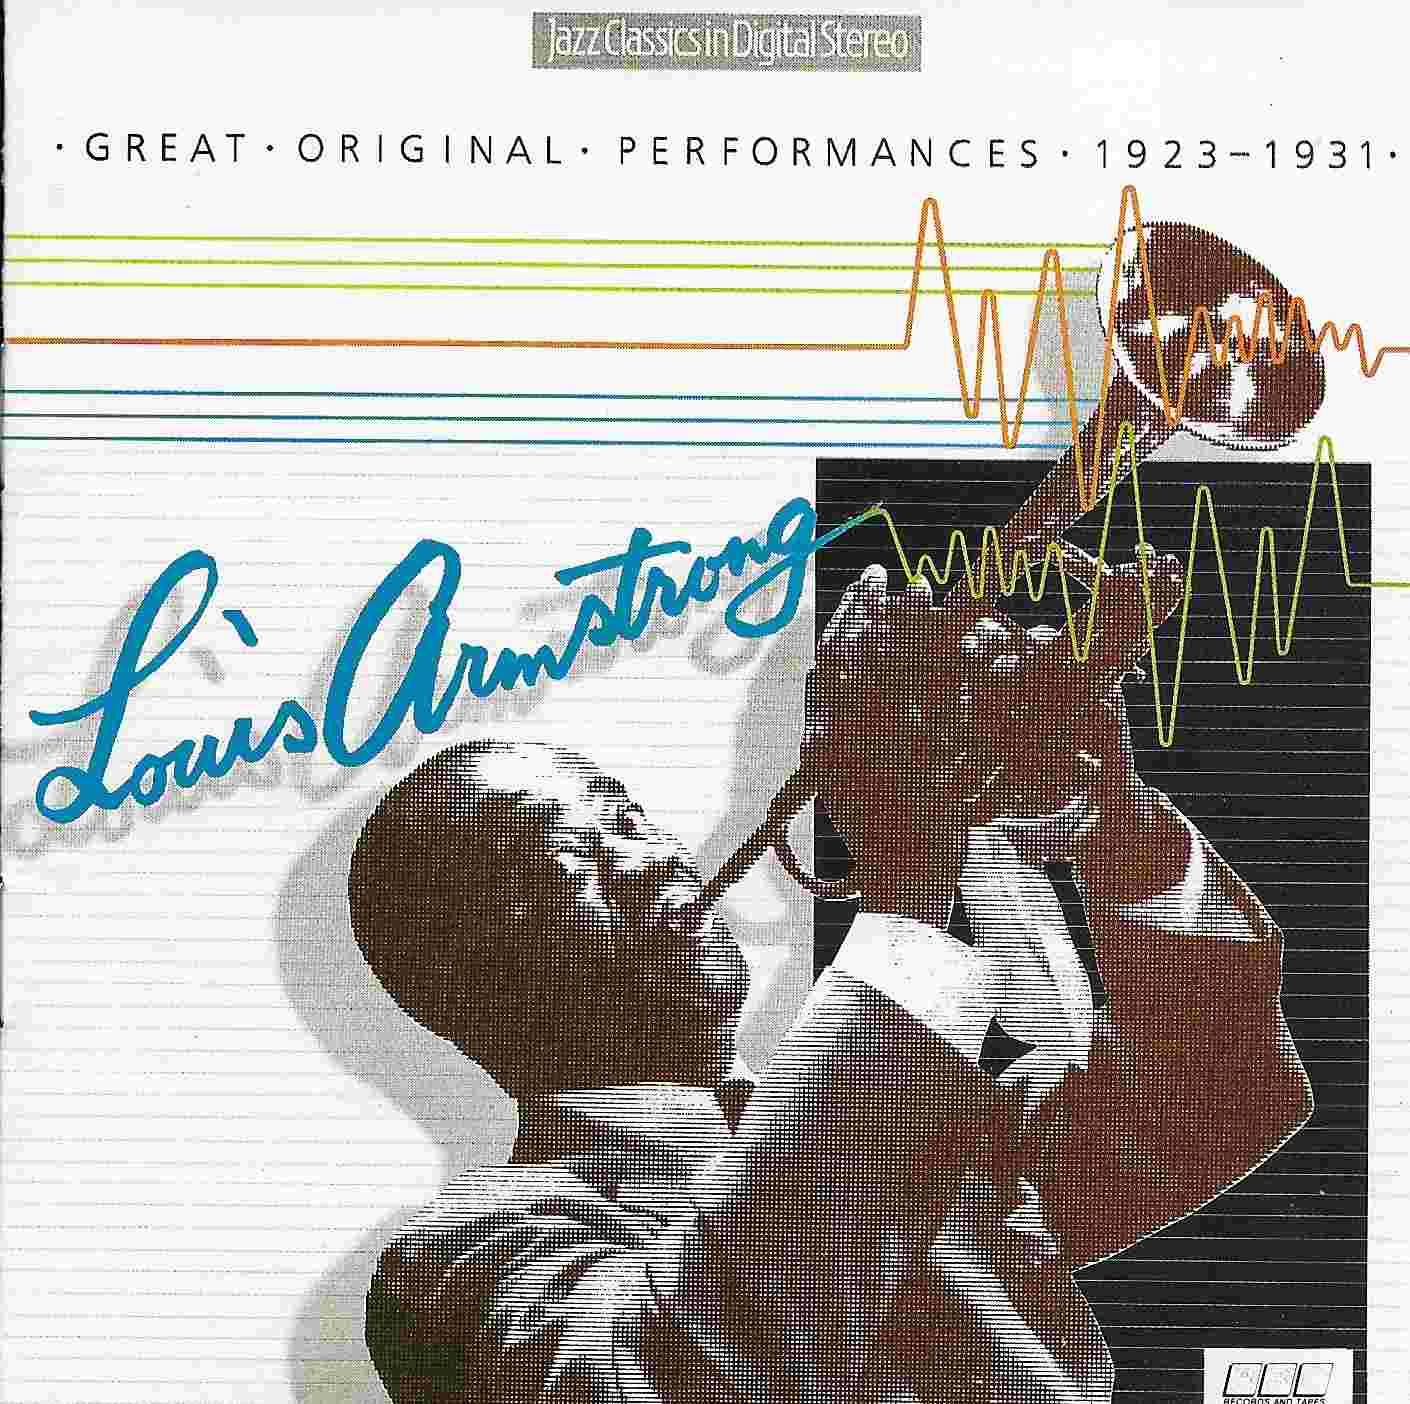 Picture of Jazz Classics - Louis Armstrong by artist Louis Armstrong from the BBC cds - Records and Tapes library